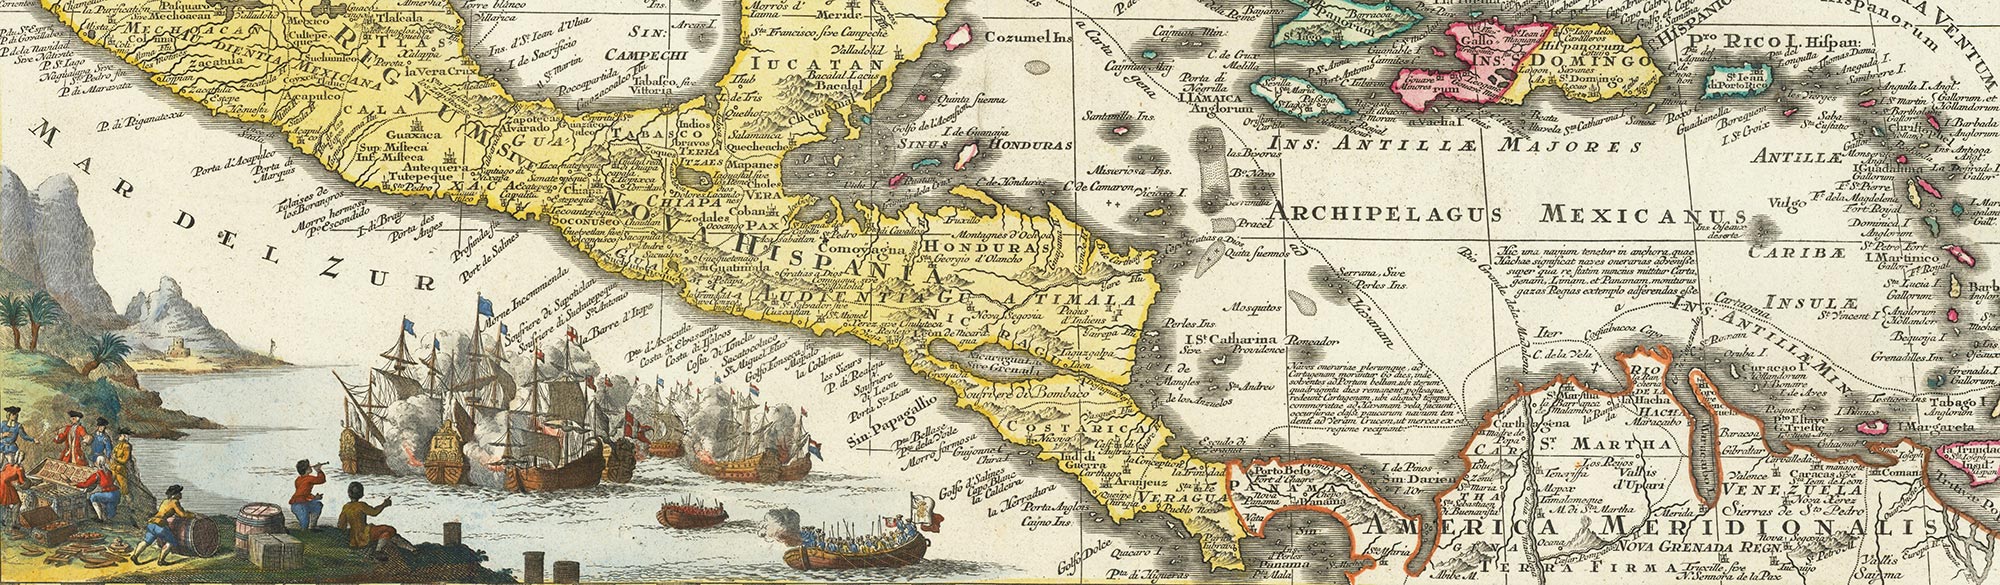 Old map showing Mexico and Cuba